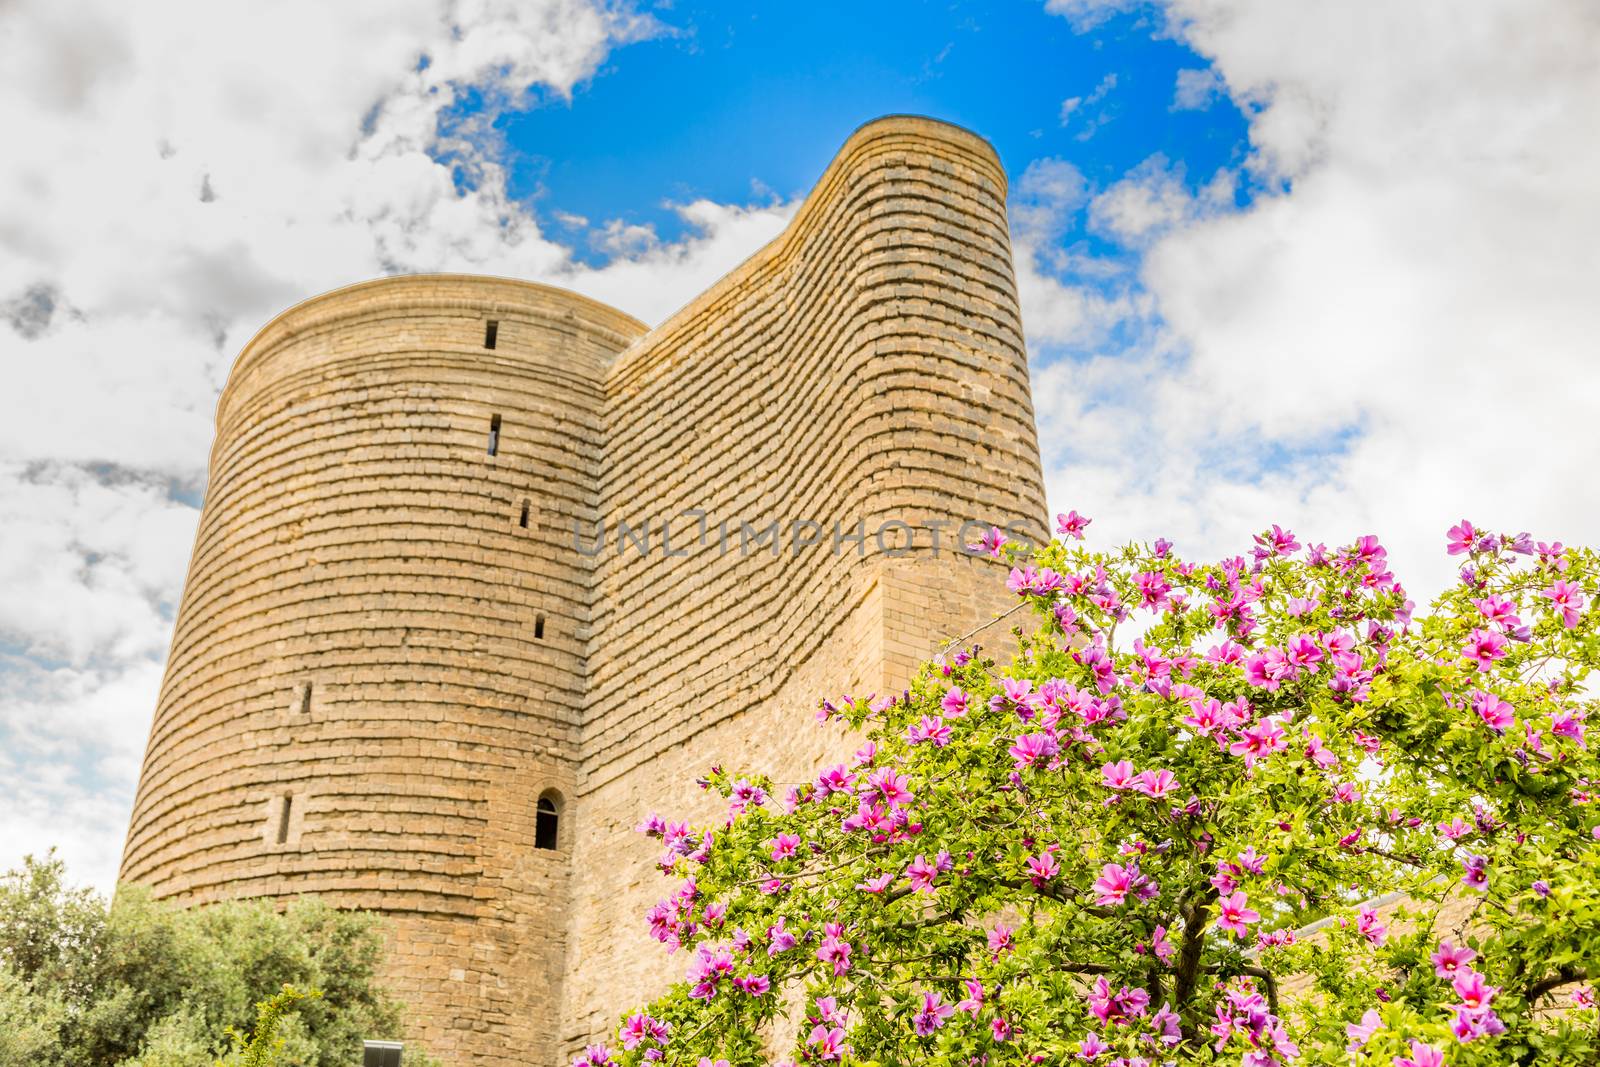 Gız Galası or medieval maiden tower with blooming tree in the foreground, old town, Baku, Azerbaijan